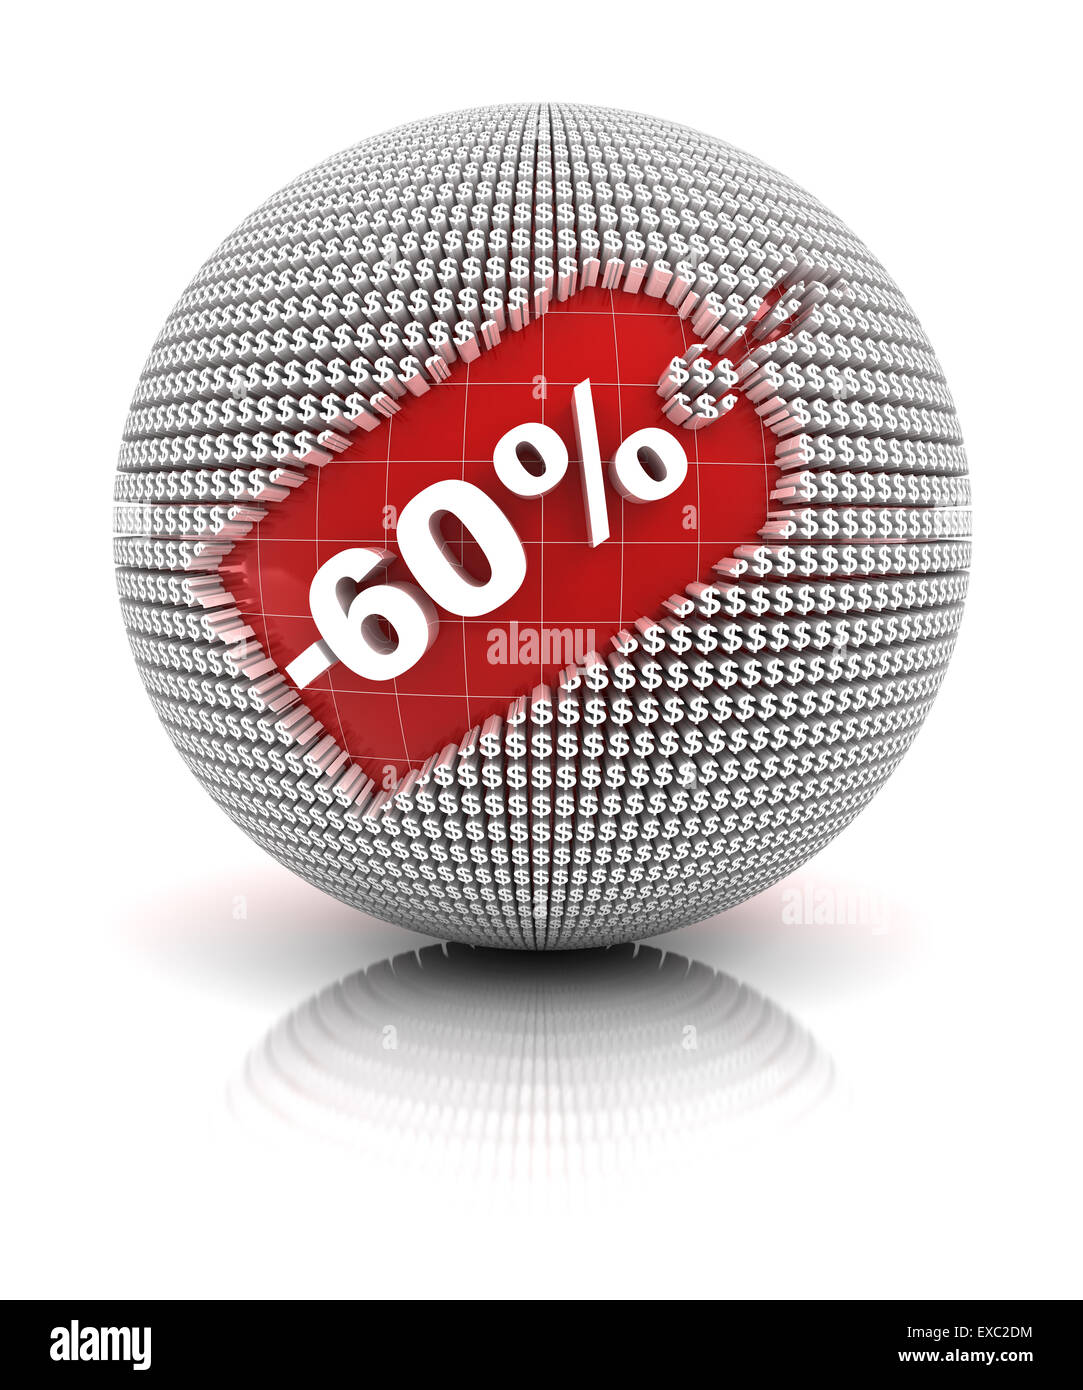 60 percent off sale tag on a sphere Stock Photo